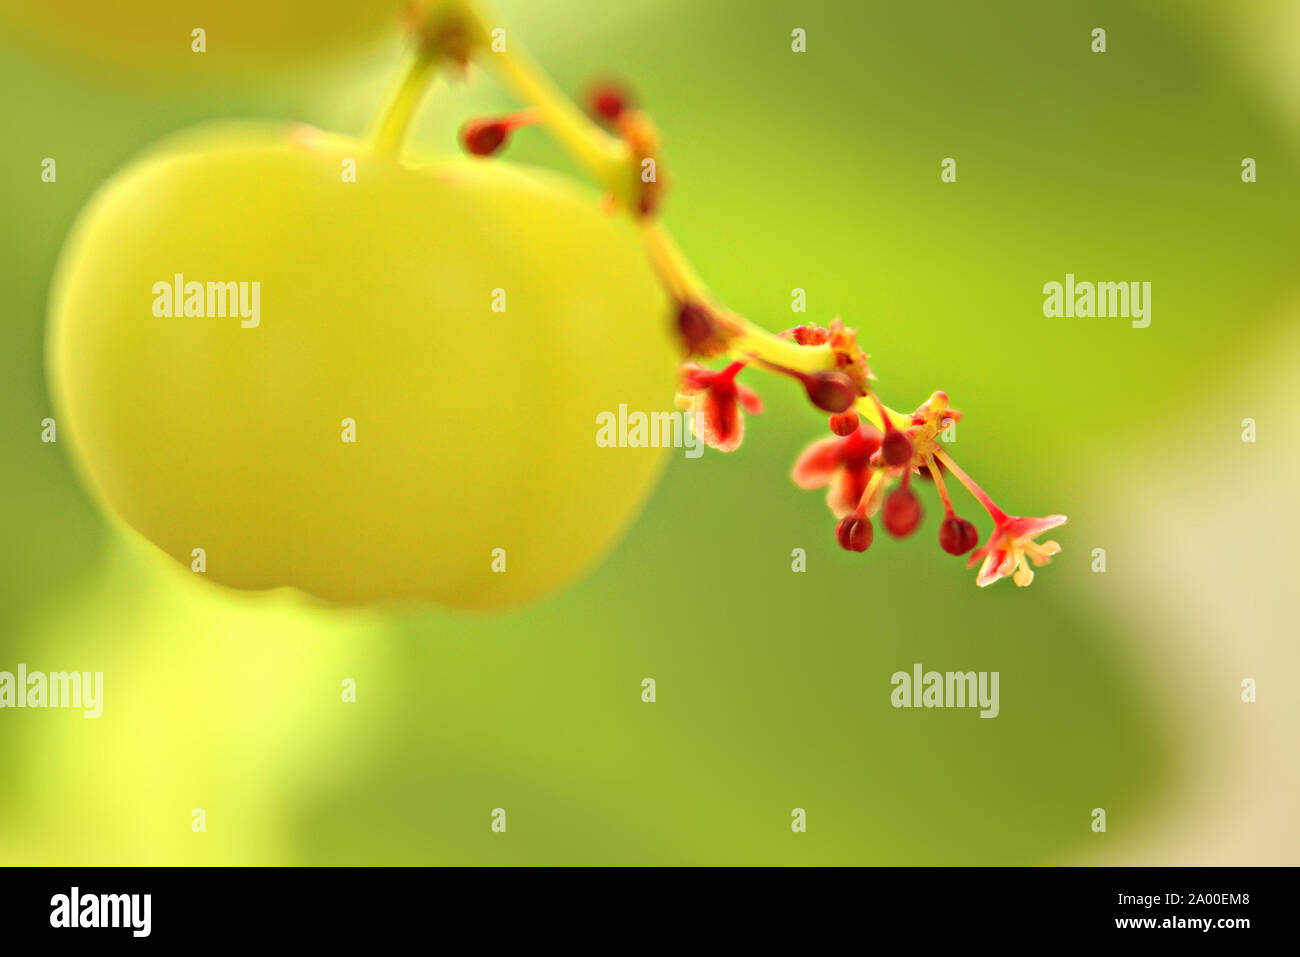 Star gooseberry flower with blurred fruit. Stock Photo